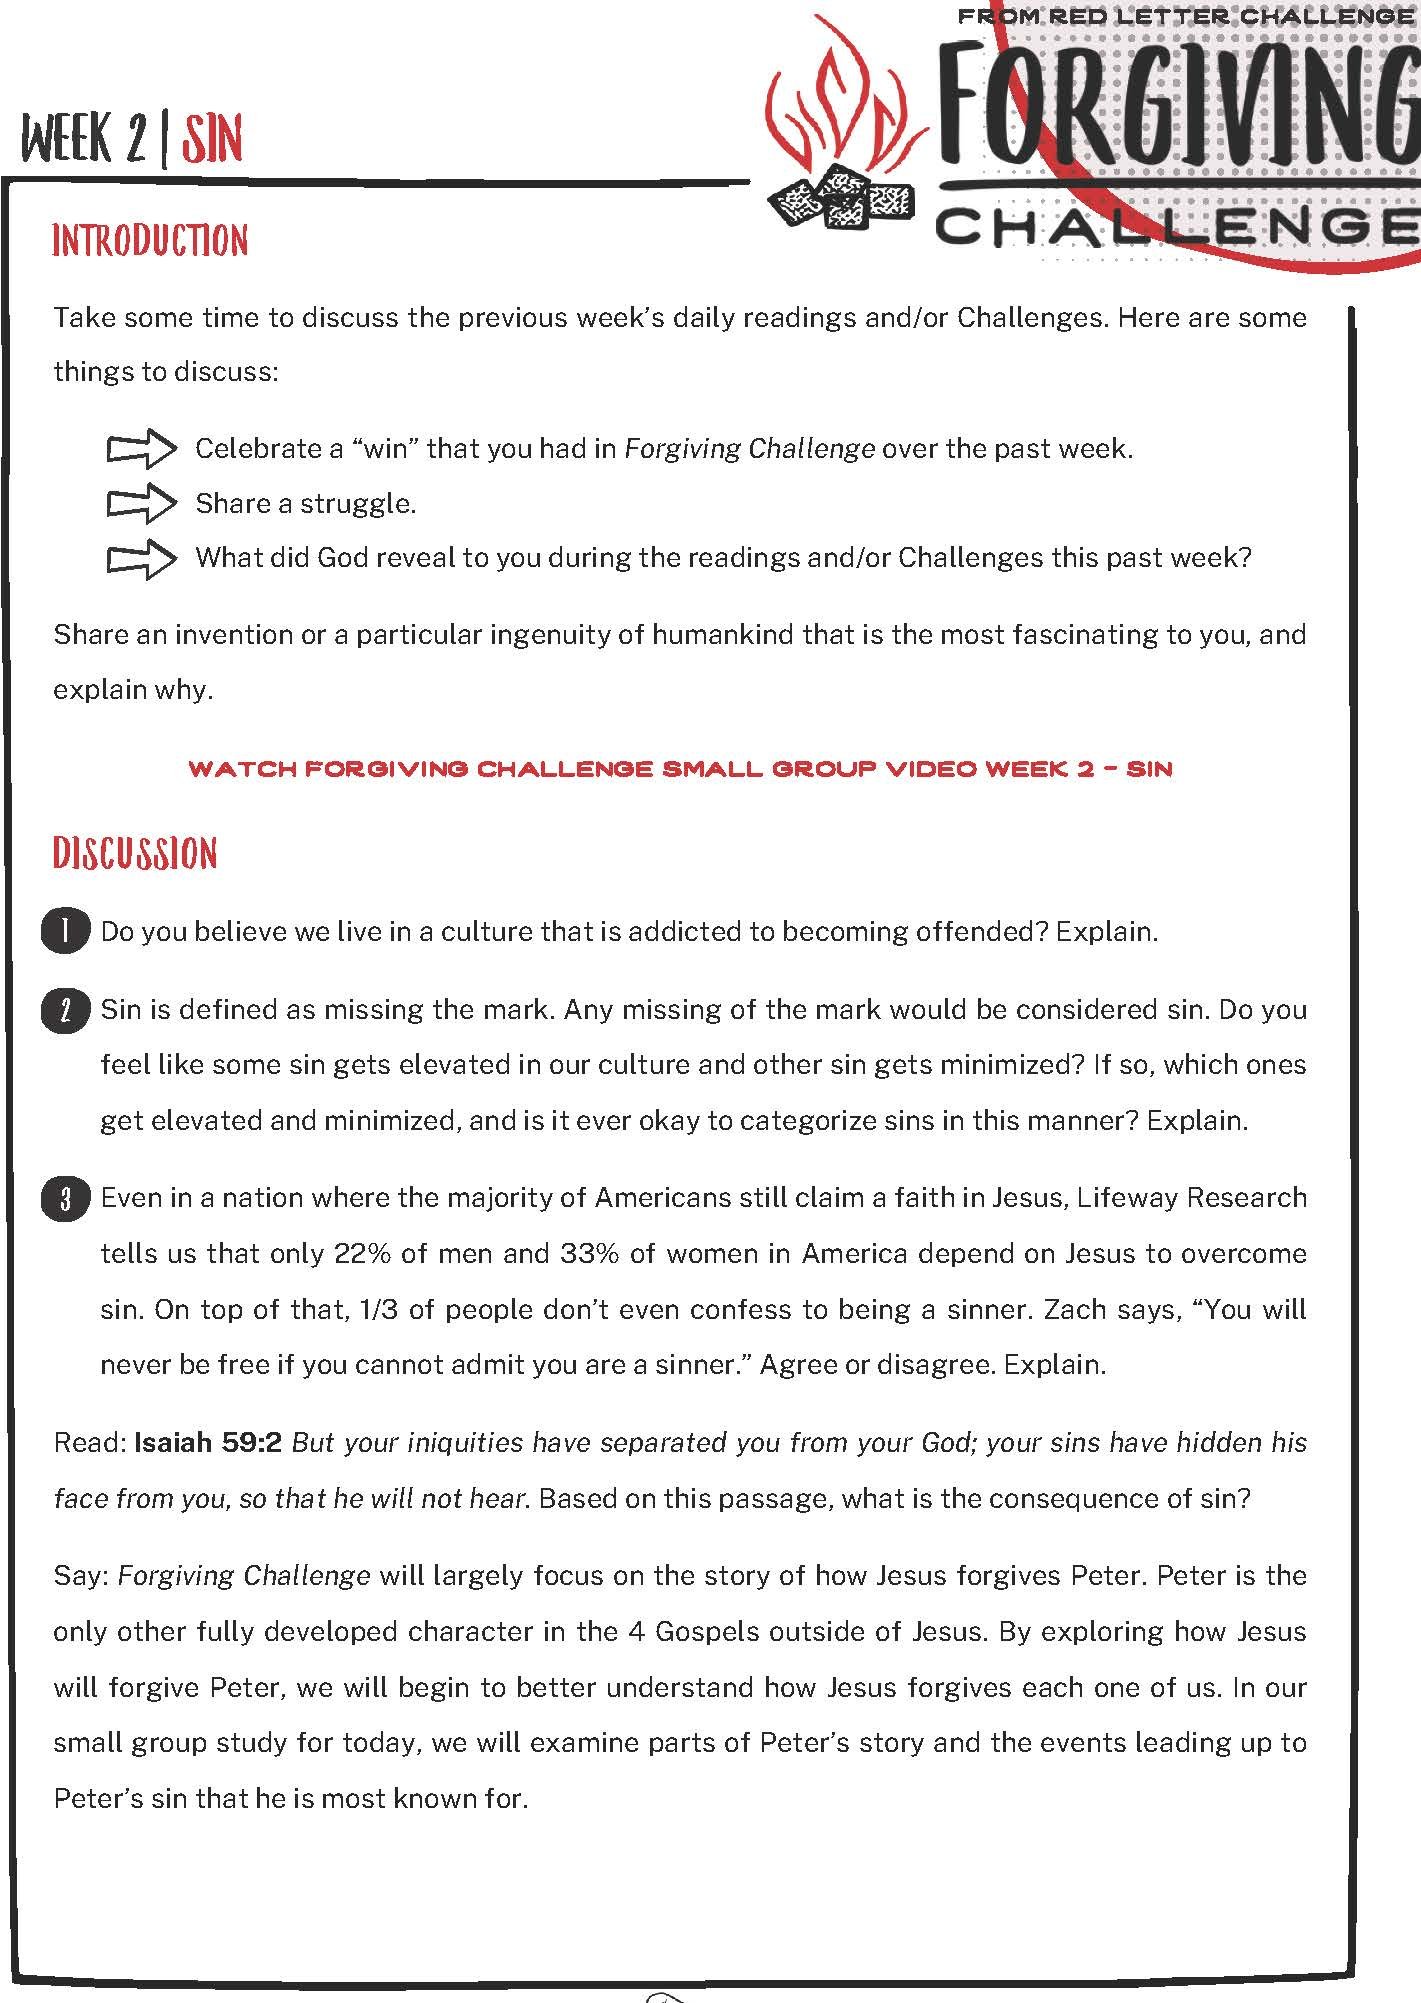 Forgiving Challenge Adult Small Group Discussion Guides_Page_05.jpg